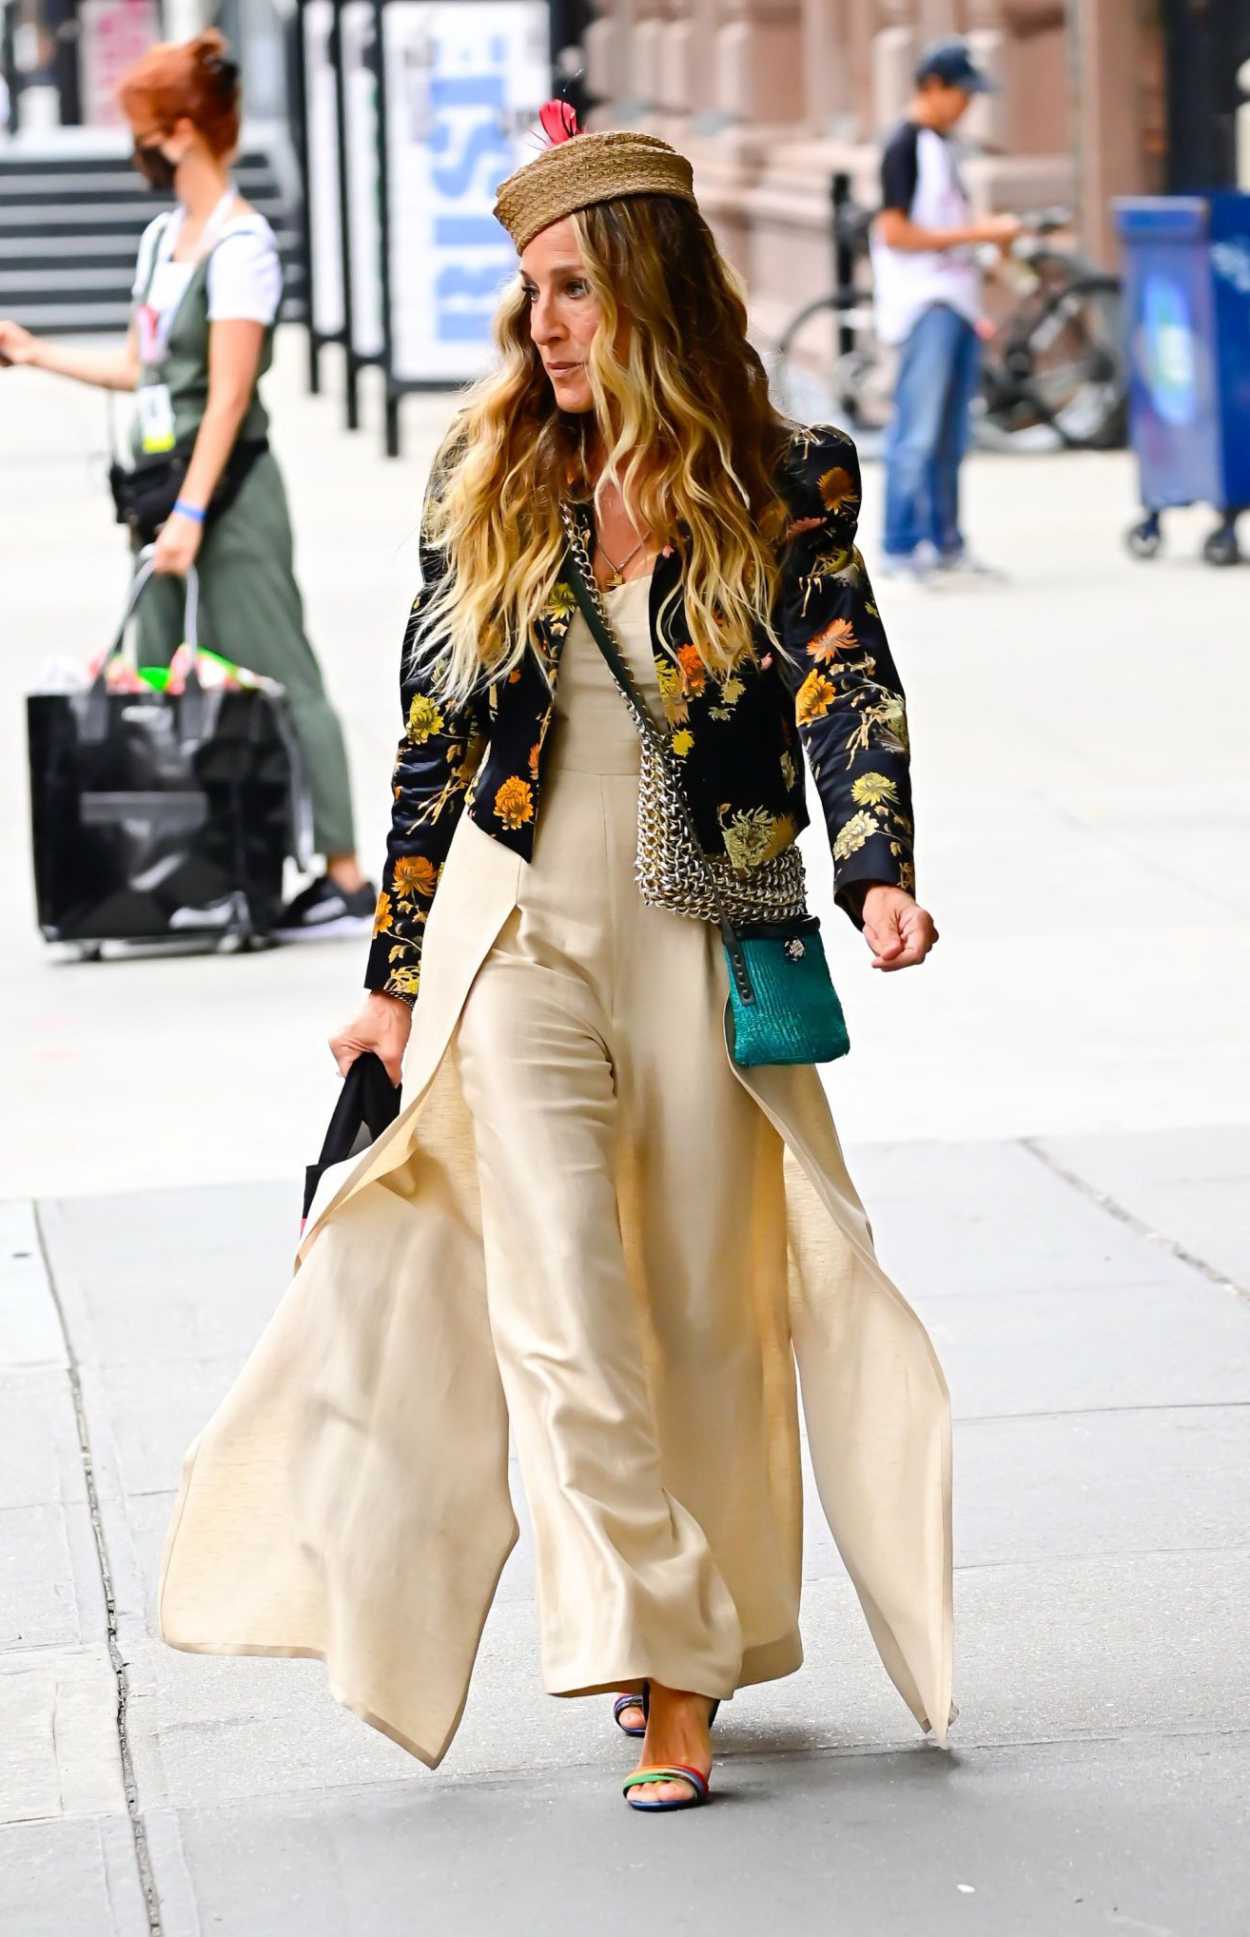 Sarah Jessica Parker in a Black Floral Jacket Was Seen on the Set of ...